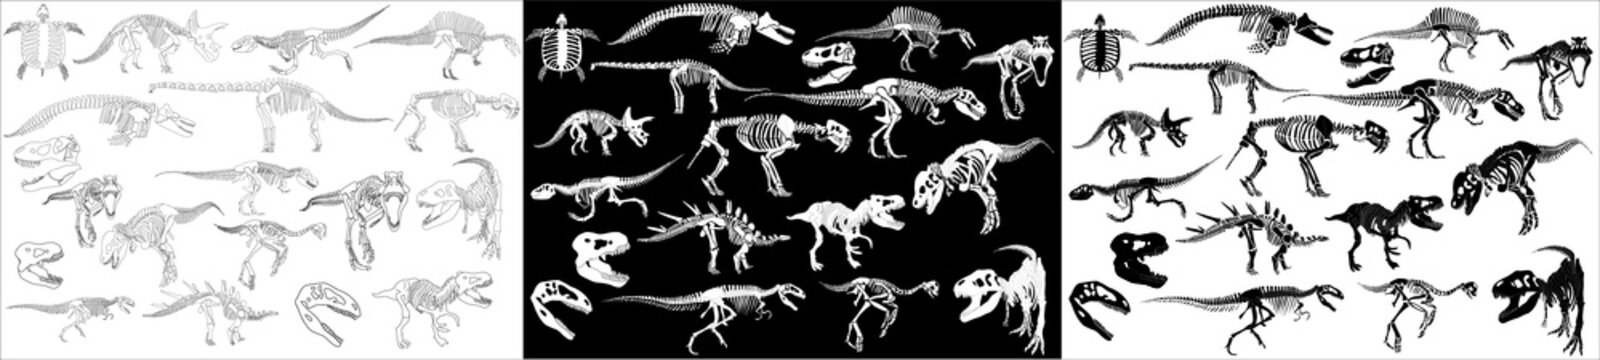 Graphic set of dinosaur skeletons isolated on white and black background. vector drawing